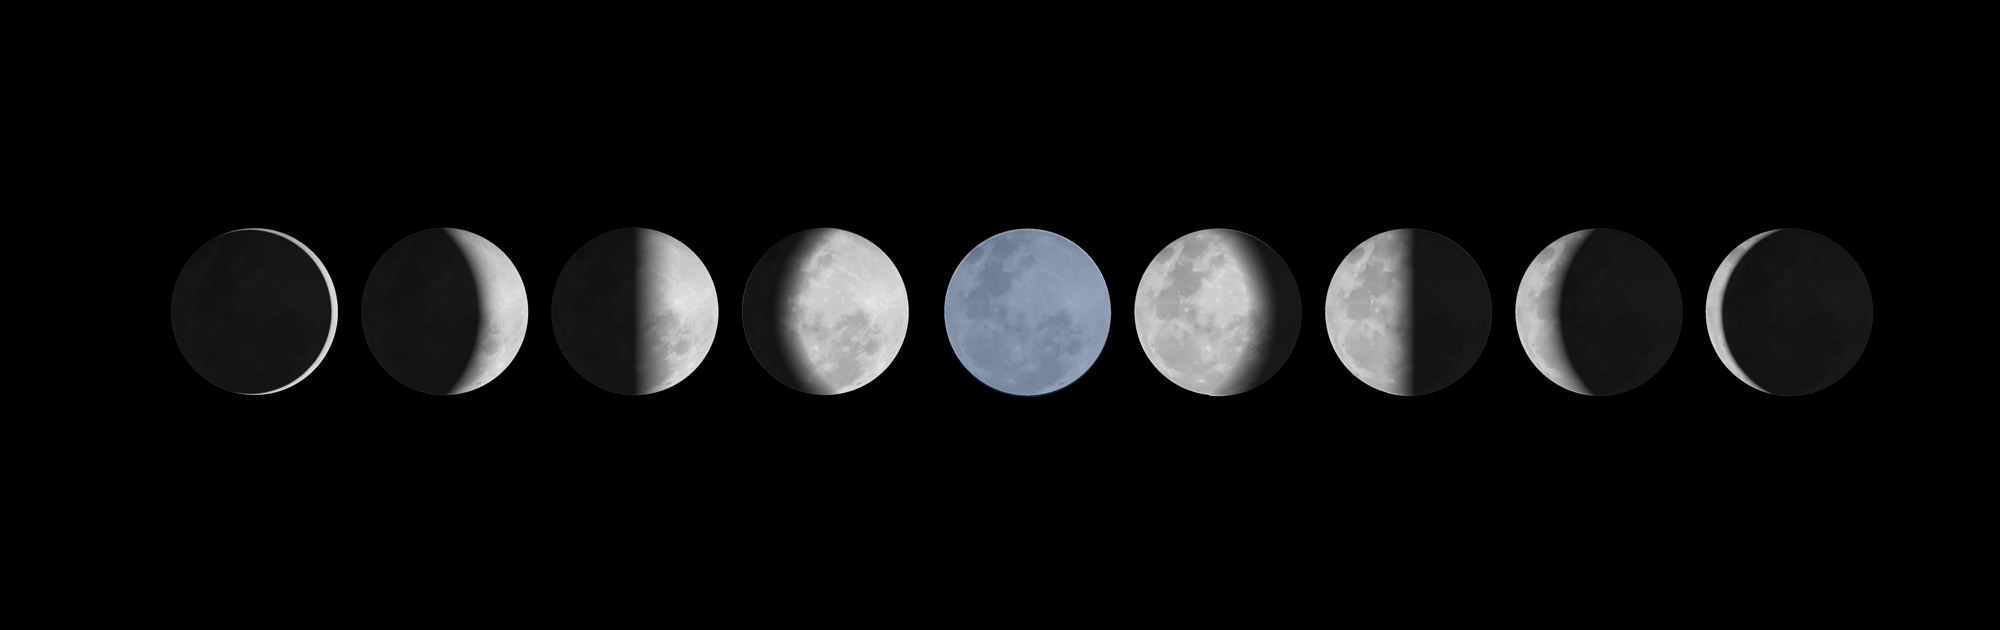 phases-of-the-moon-vector.jpg